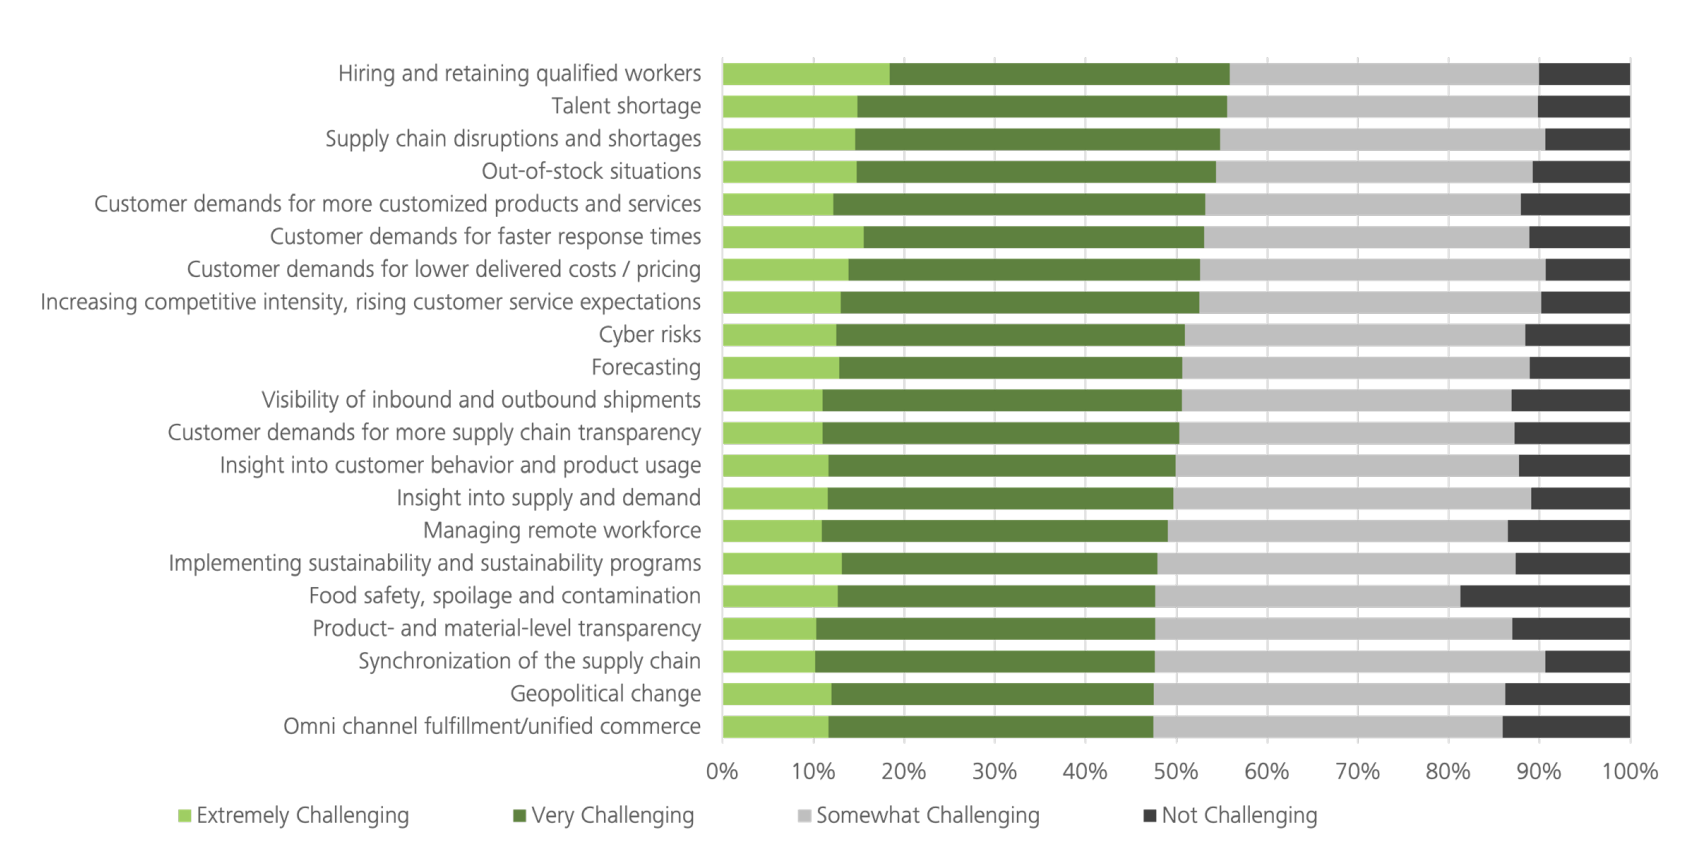 MHI’s 2023 Annual Industry Report shows “hiring and retaining qualified workers” and “talent shortage” as the top two company challenges.